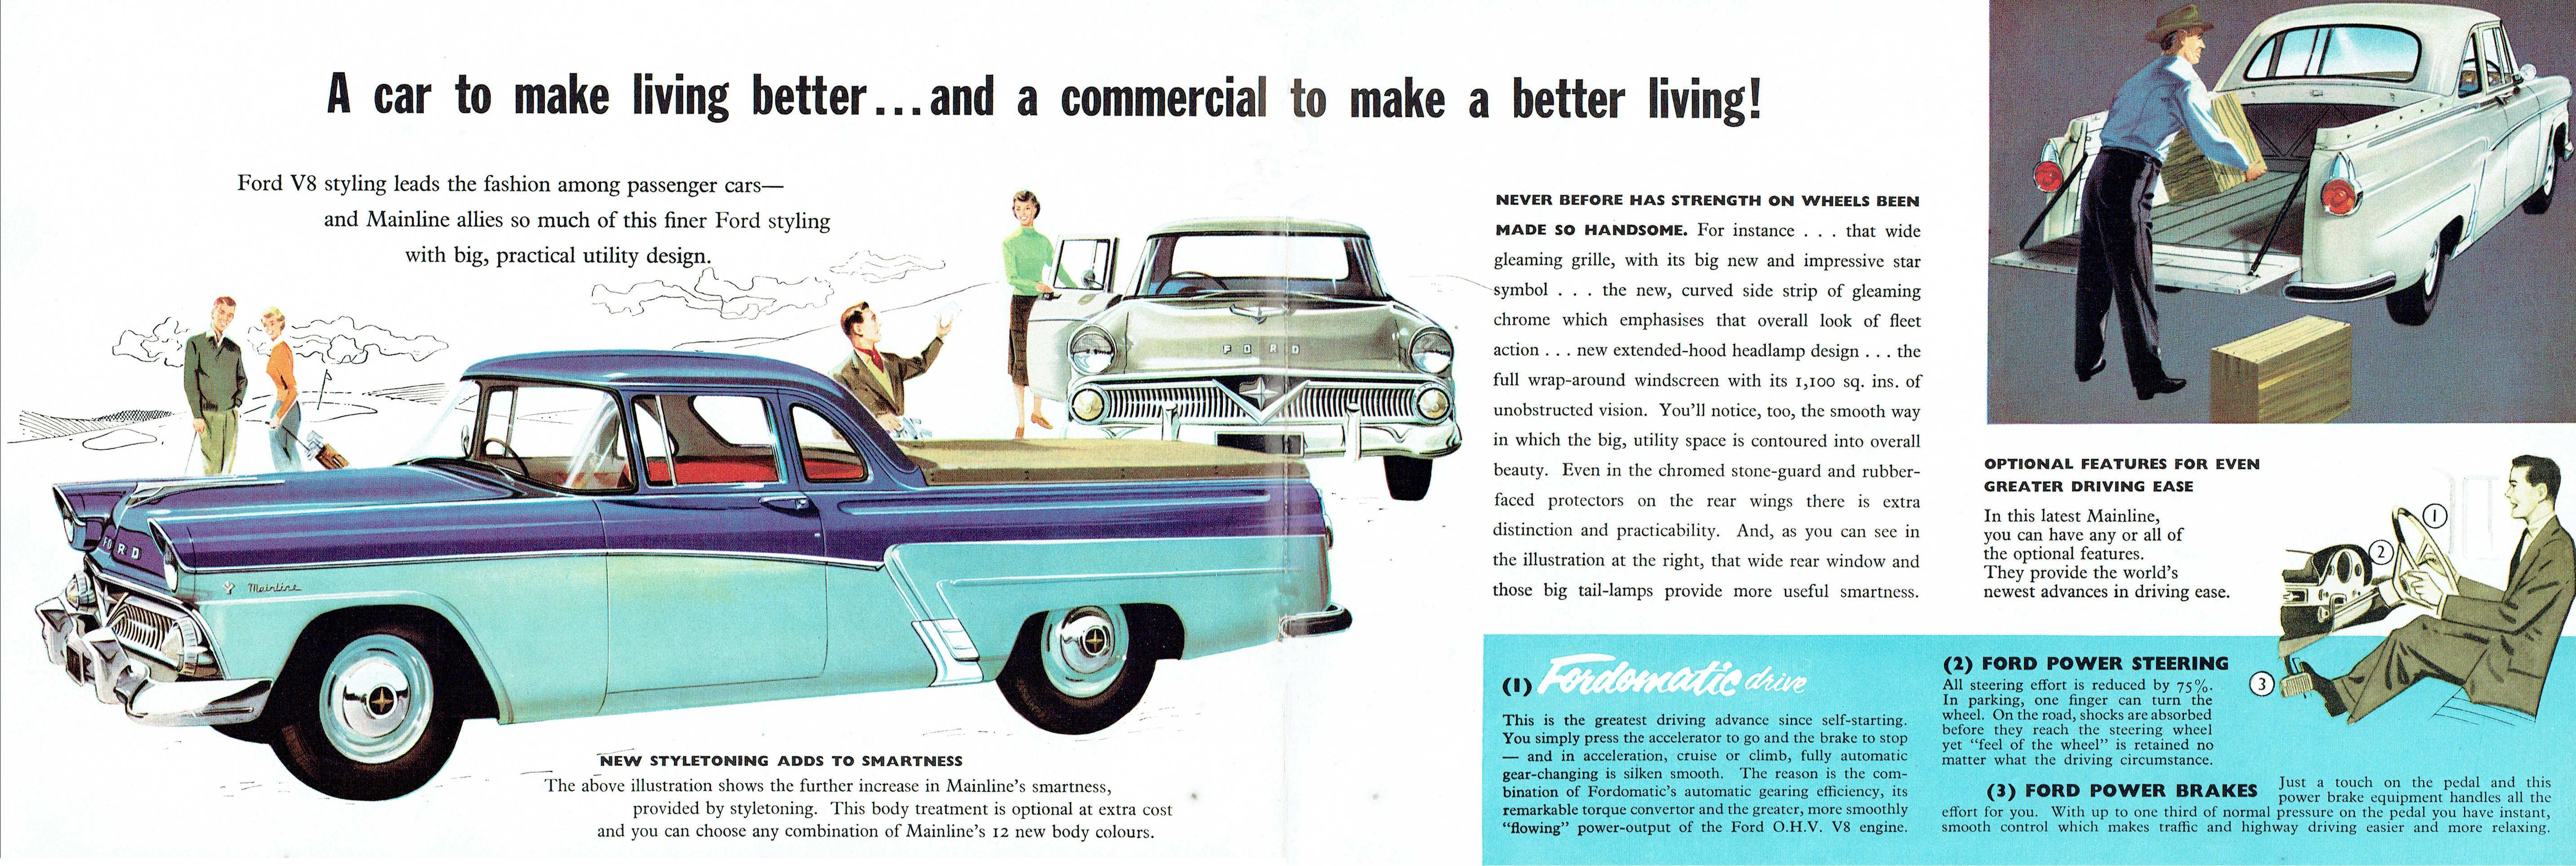 1958_Ford_Mainline_Coupe_Utility-04-05